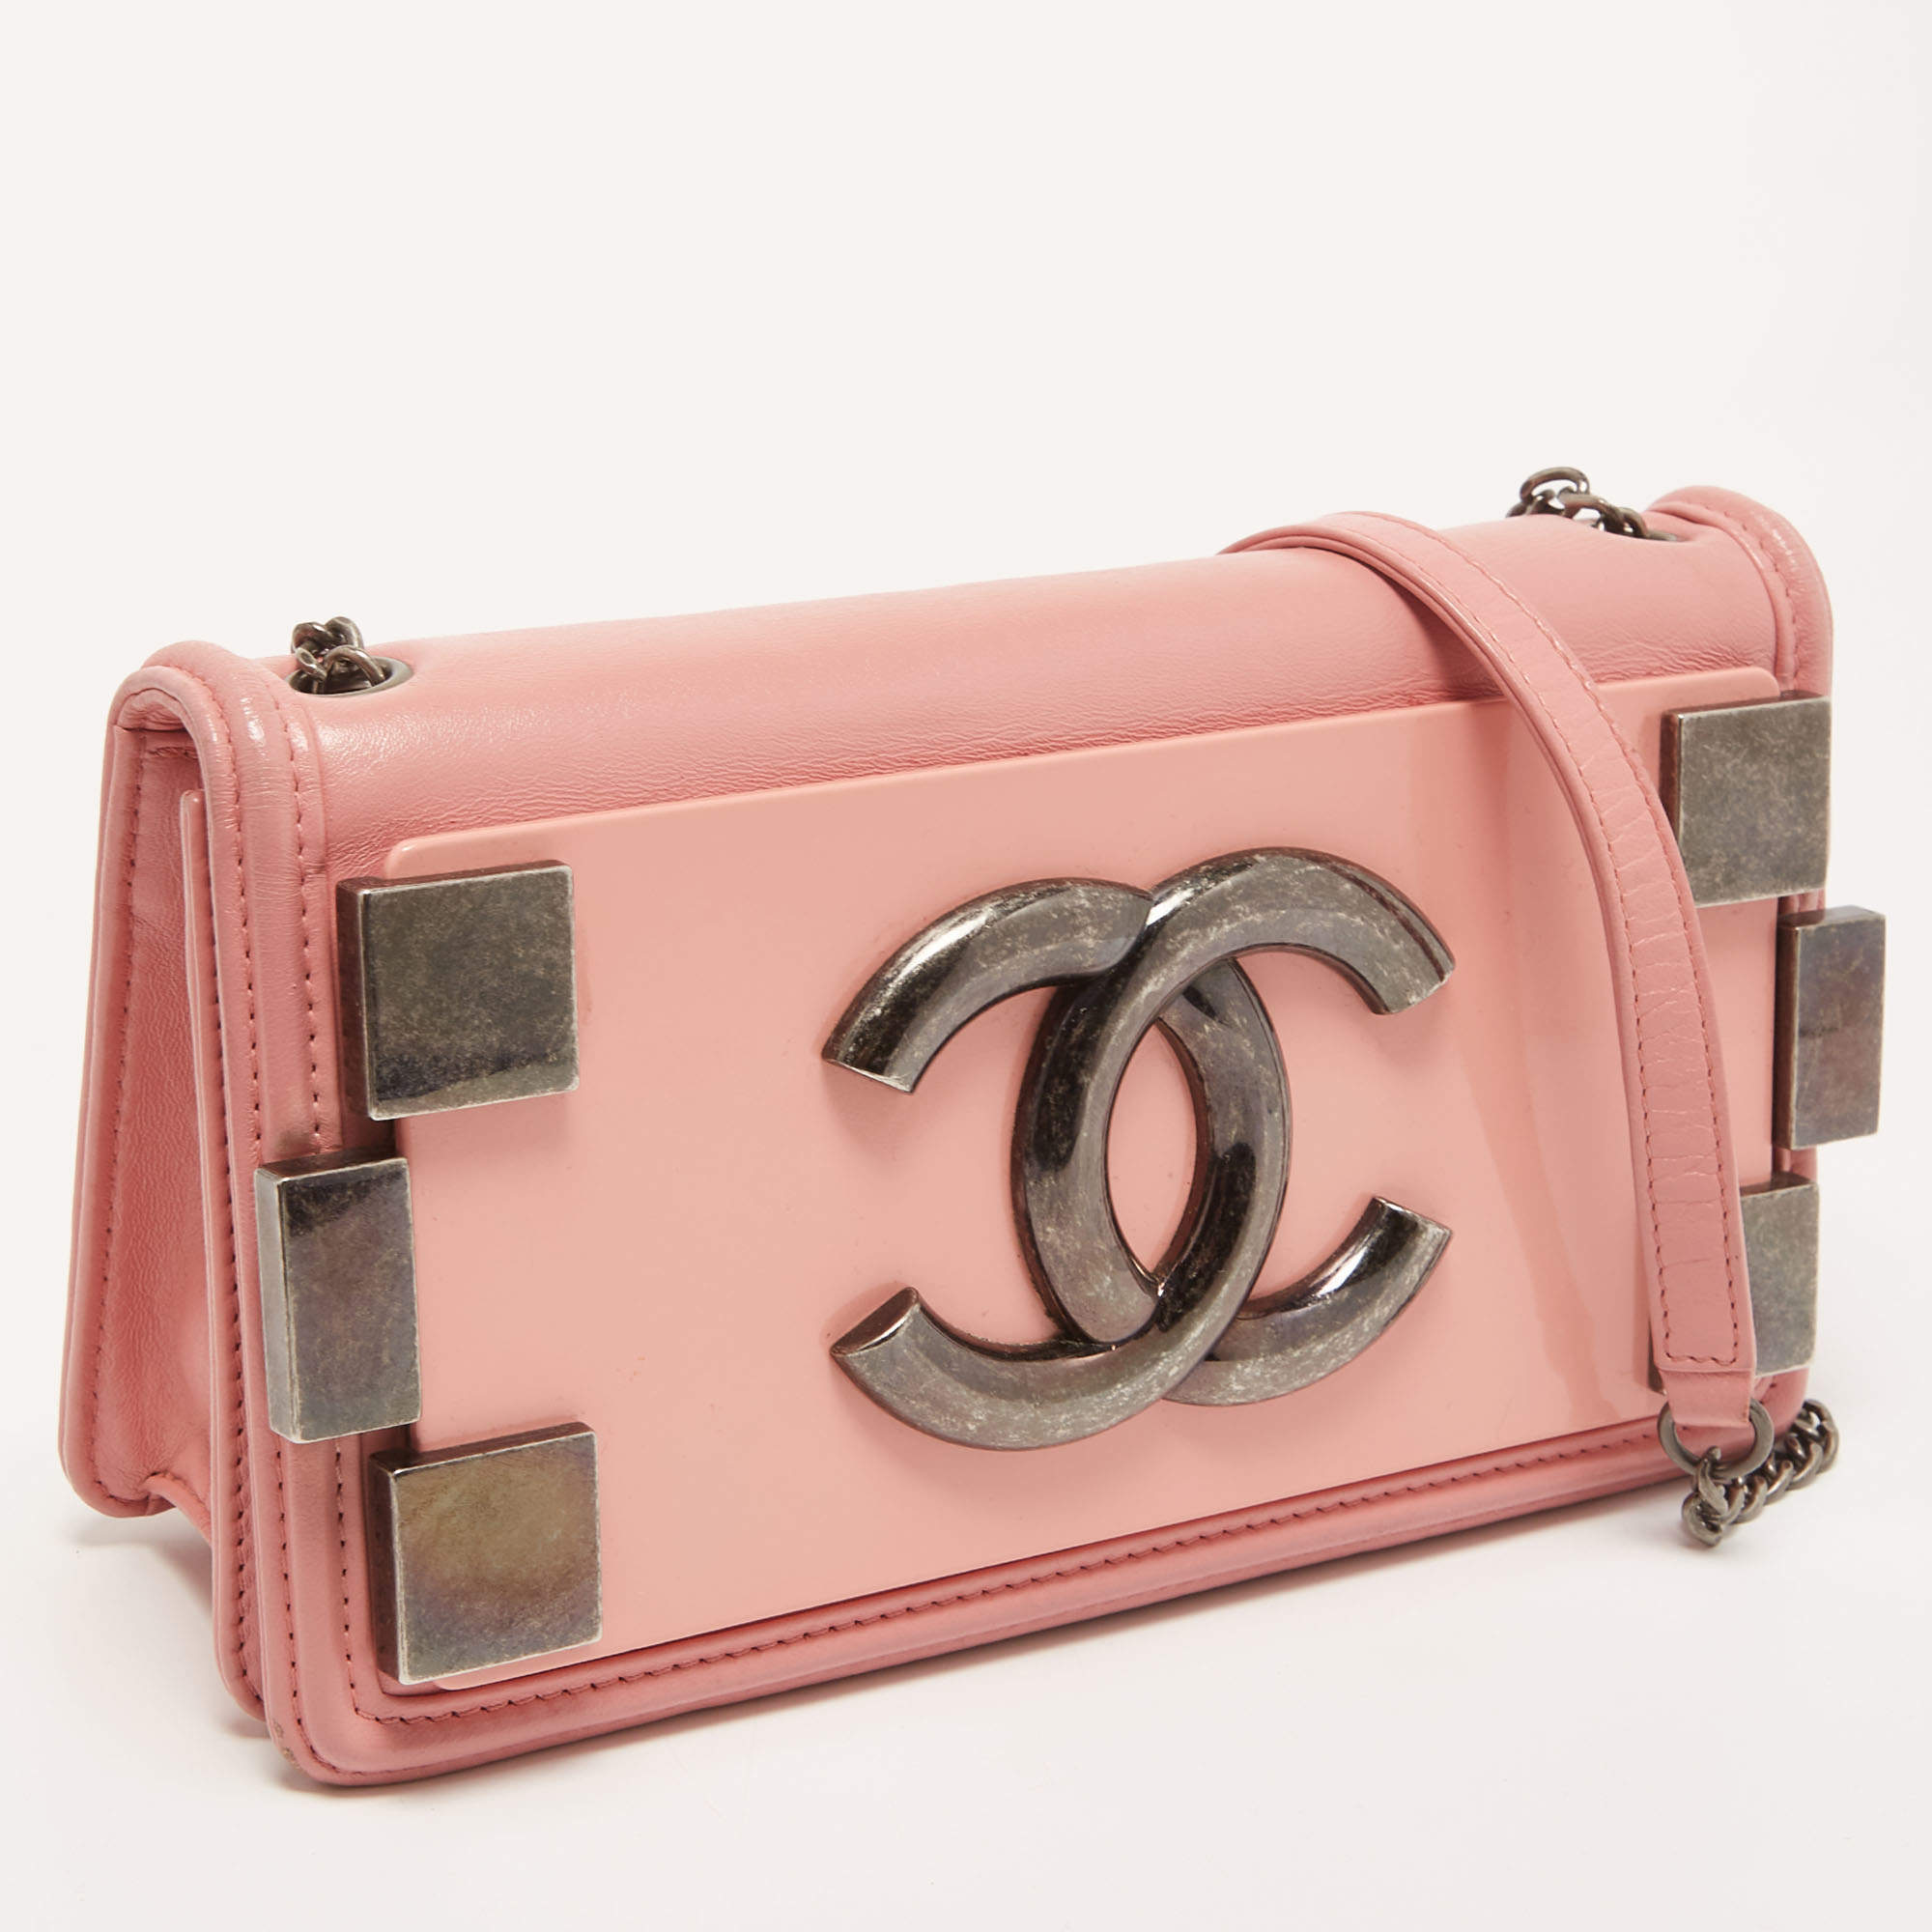 Chanel Pink Plexiglas Boy Brick Clutch Bag with Silver Hardware   Lot  58130  Heritage Auctions